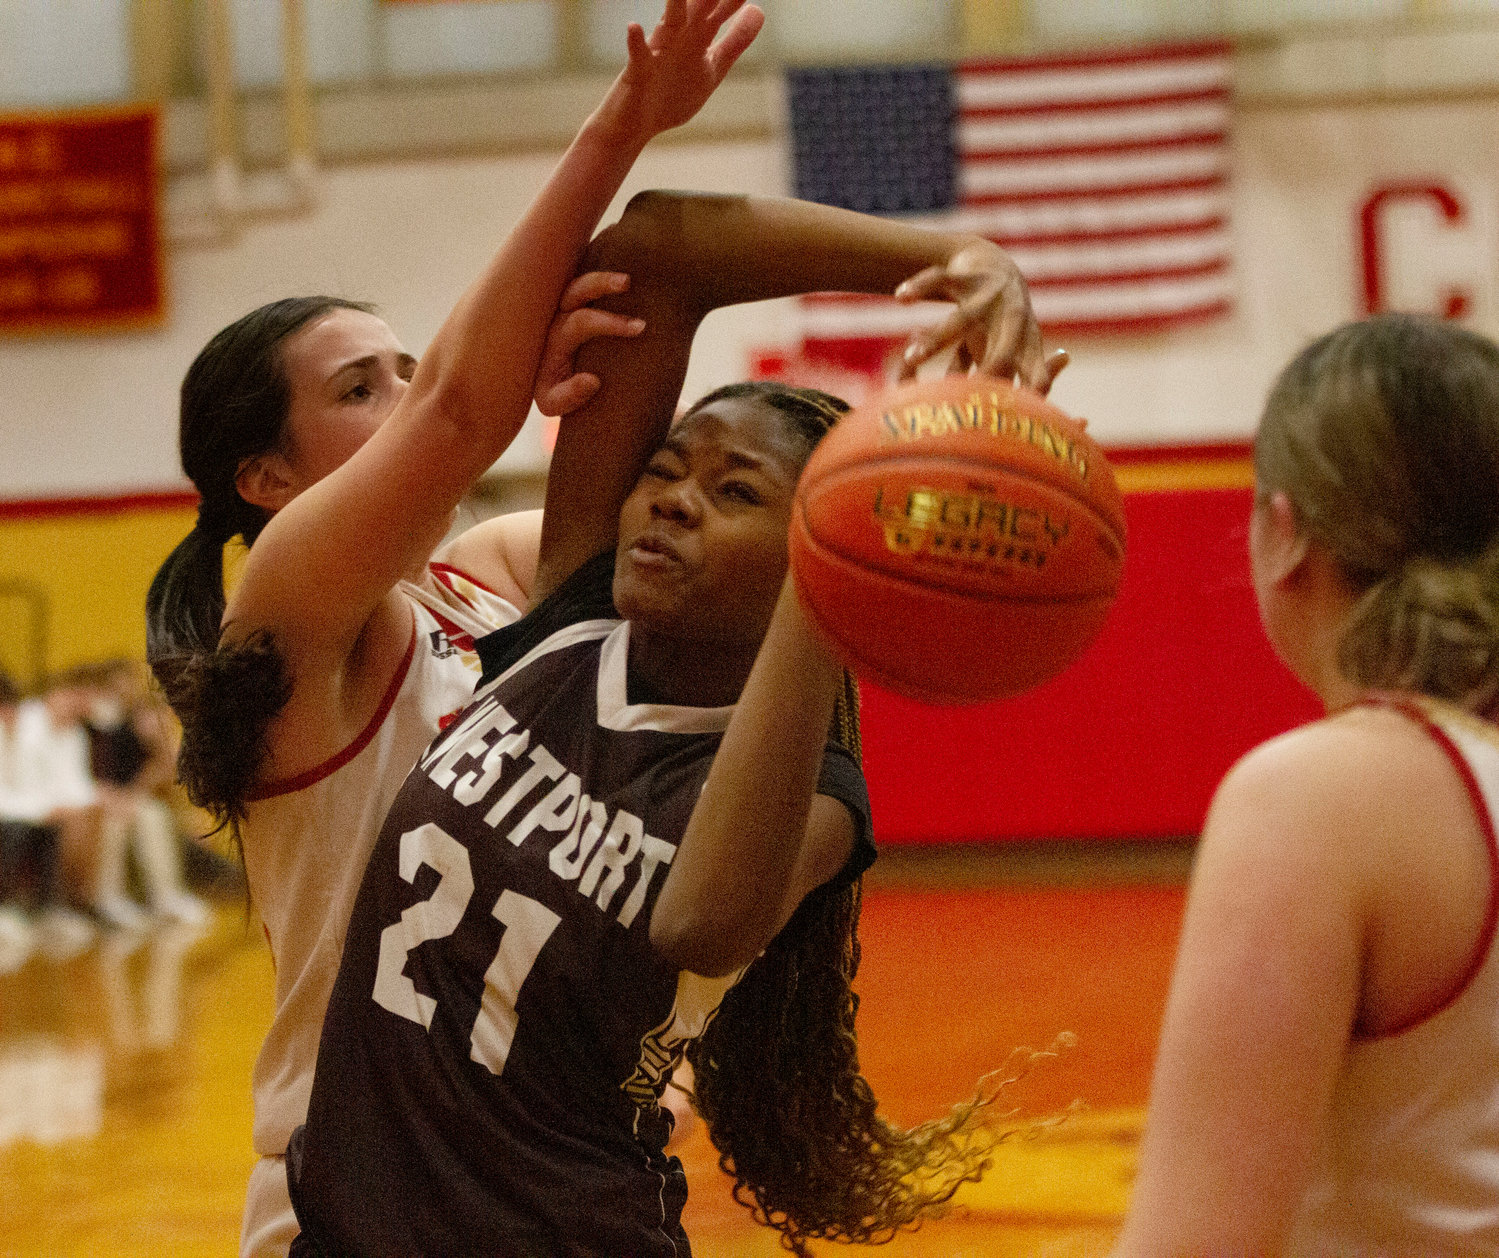 Jenna Egbe fights for a rebound. The tall sophomore led the team with 9 rebounds.